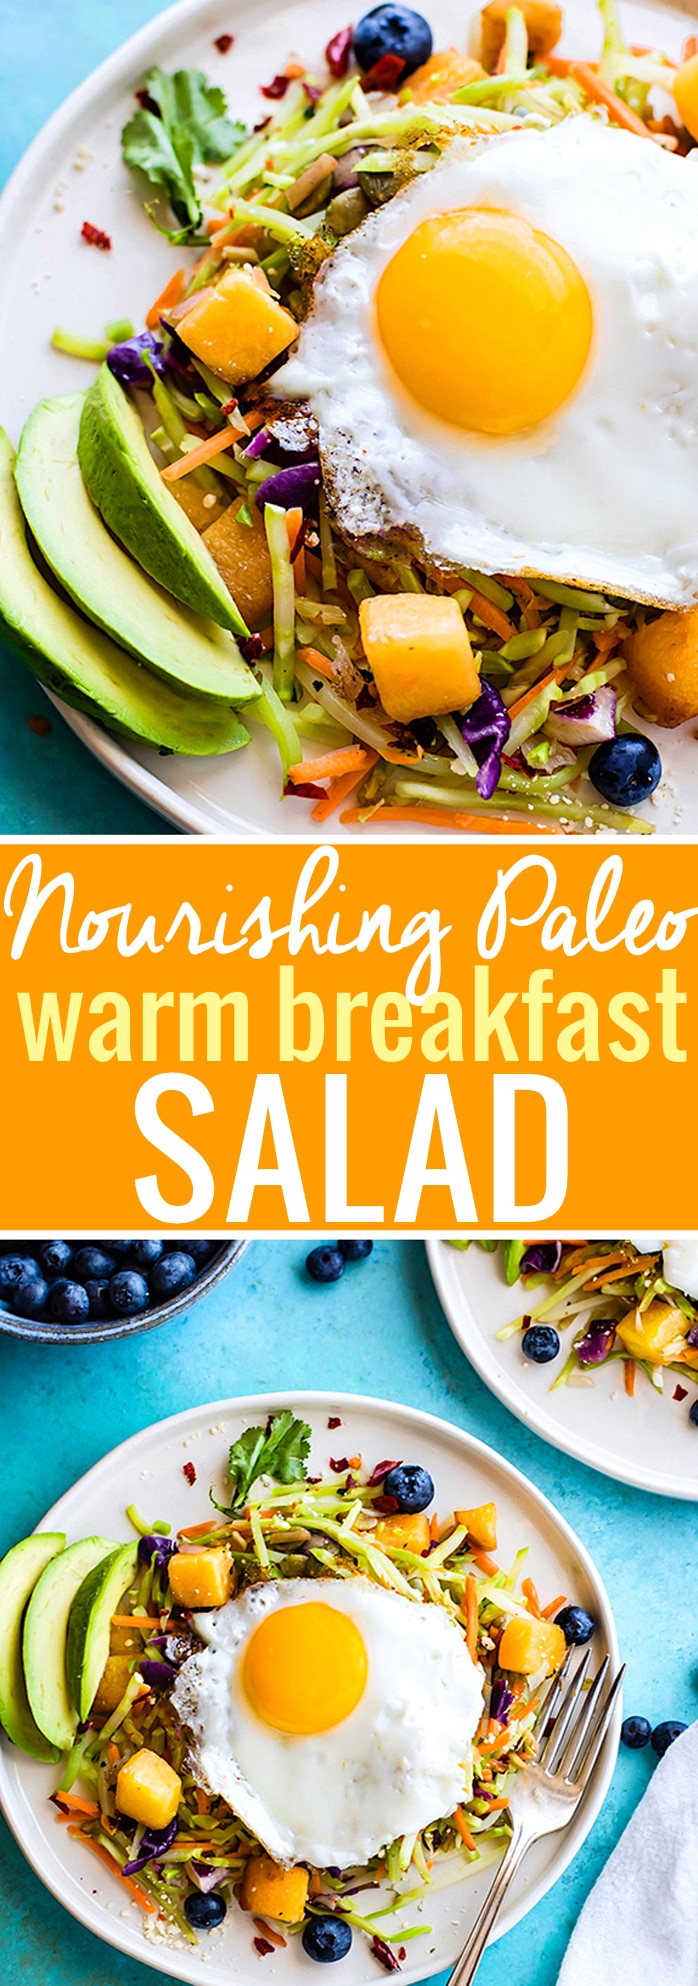 Breakfast salads are the best way to start the day! Create a healthy warm Paleo morning meal with lightly cooked broccoli cole slaw, onion, and squash topped with seasonal fruit and a protein rich fried egg! A nourishing breakfast salad worth waking up for! Easy, delicious, nutritious! @cottercrunch